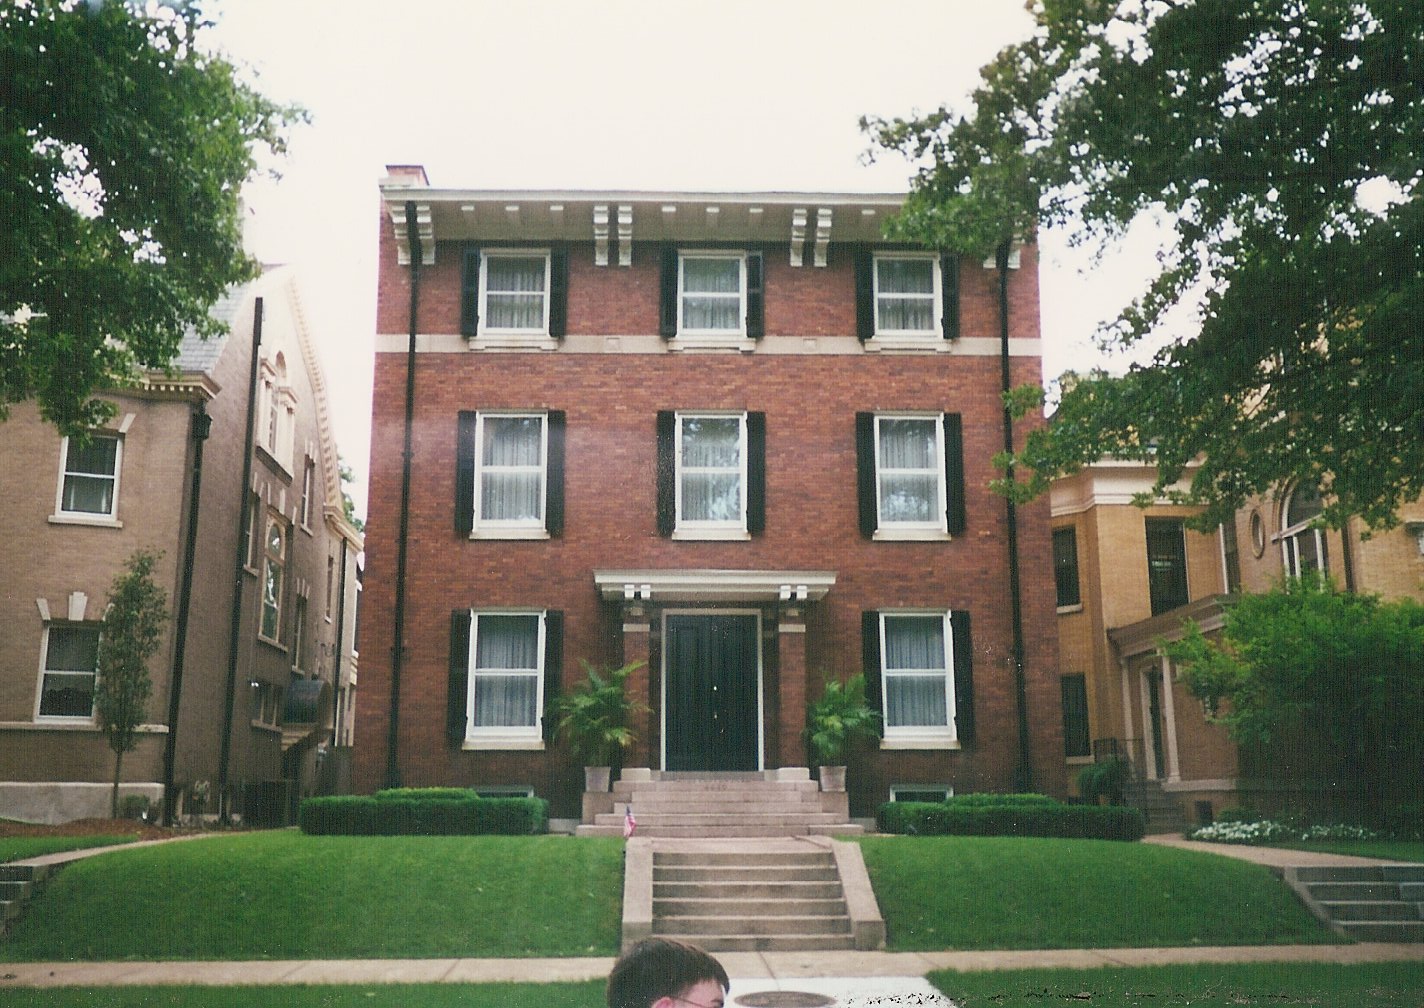 My Literary Travels: T.S. Eliot, St. Louis, MO (1999)